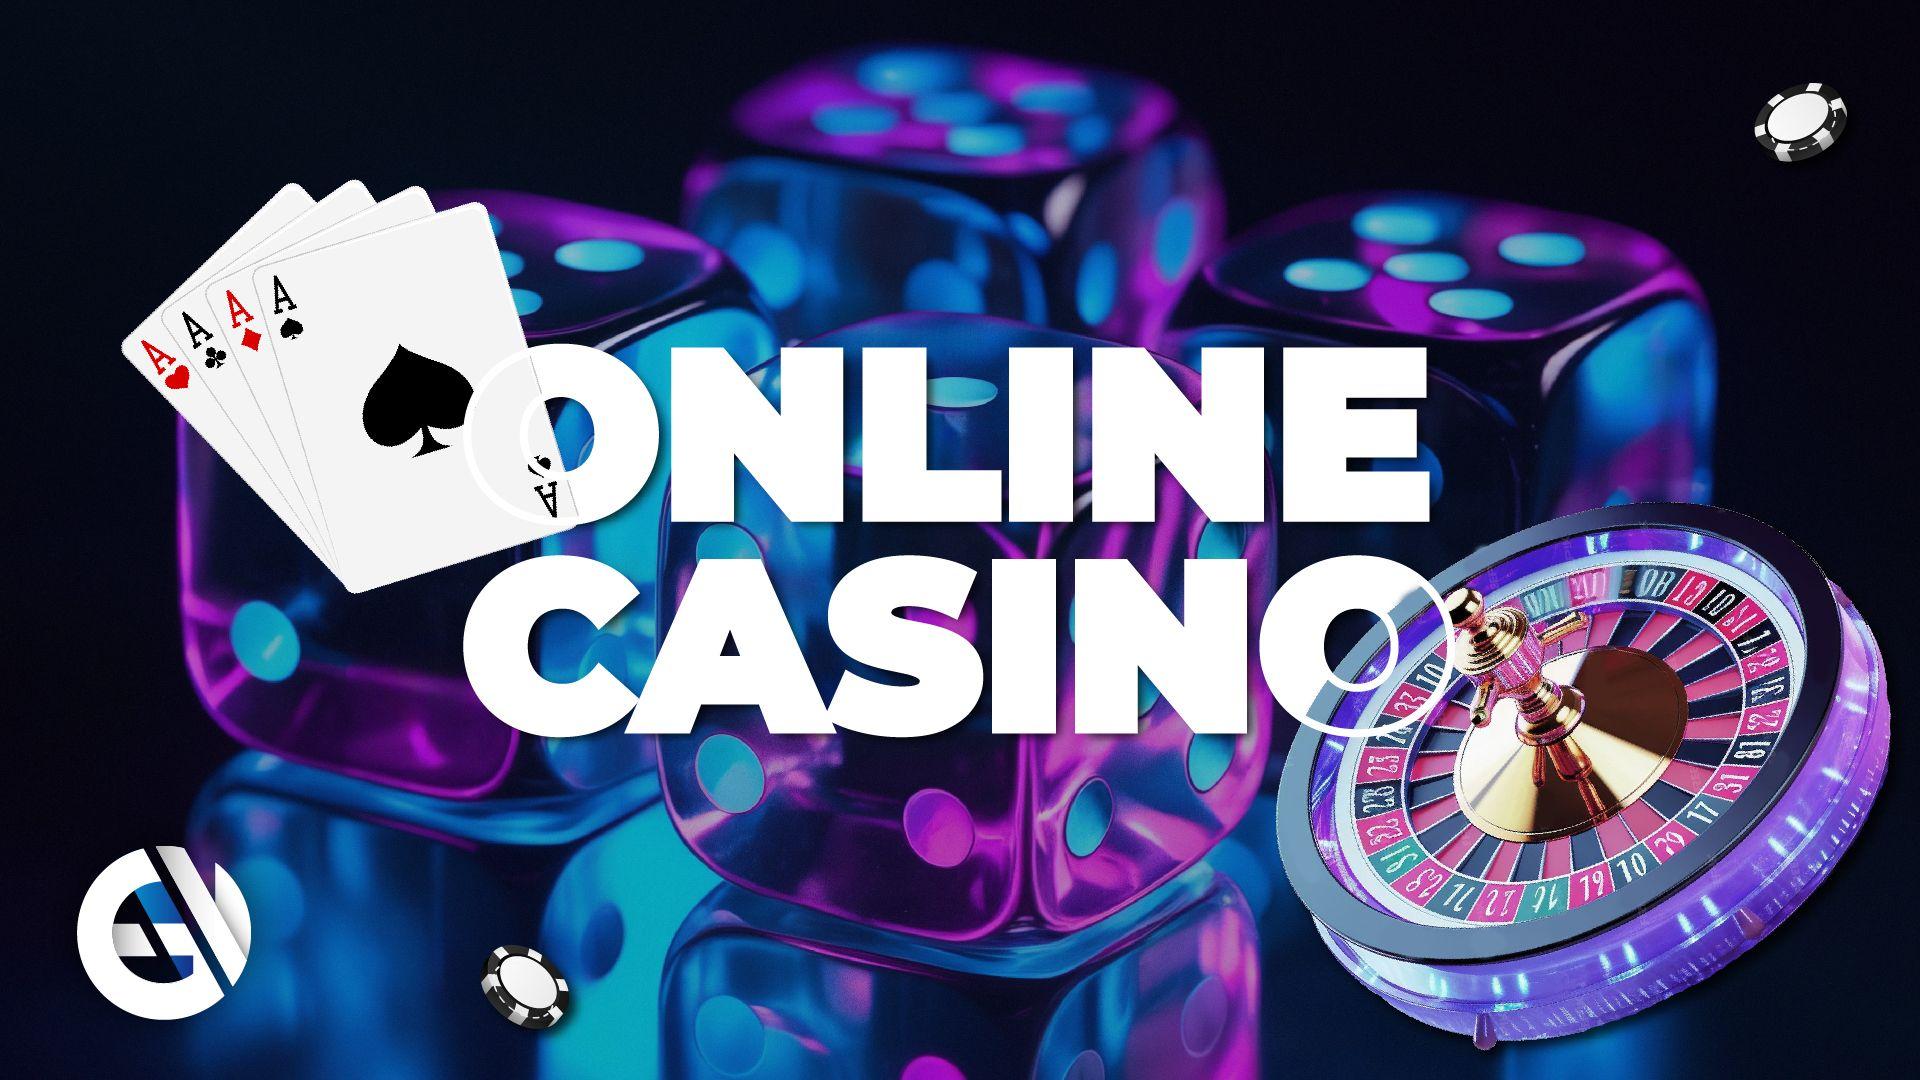 Choosing Online Casinos: What to Look For and What to Avoid